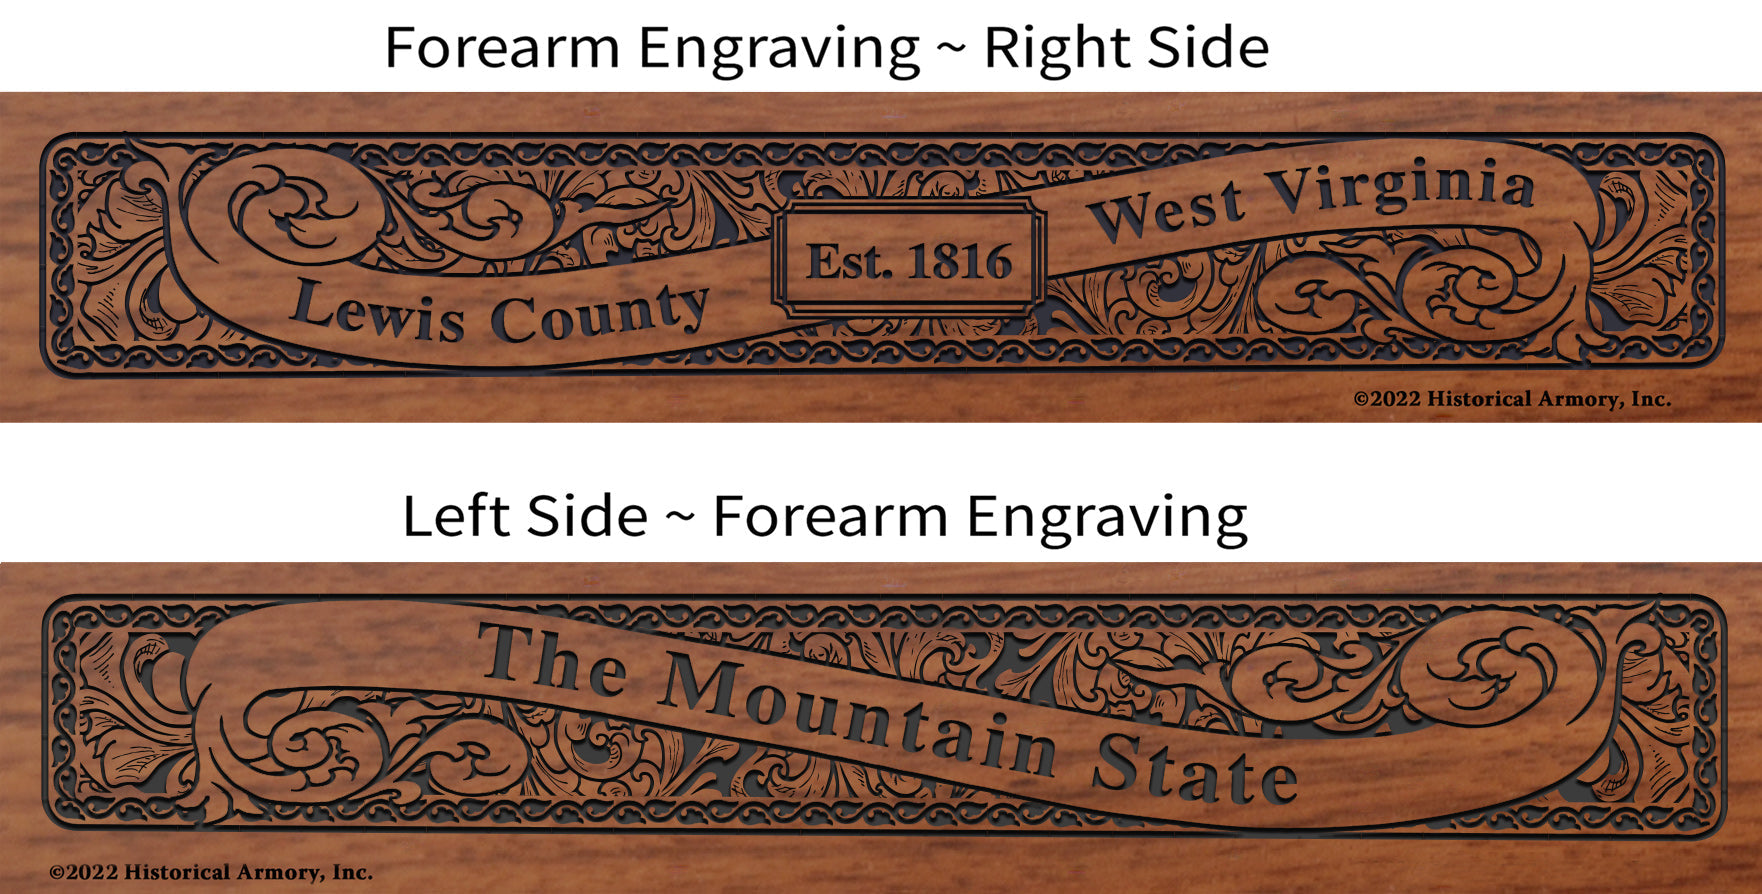 Lewis County West Virginia Engraved Rifle Forearm